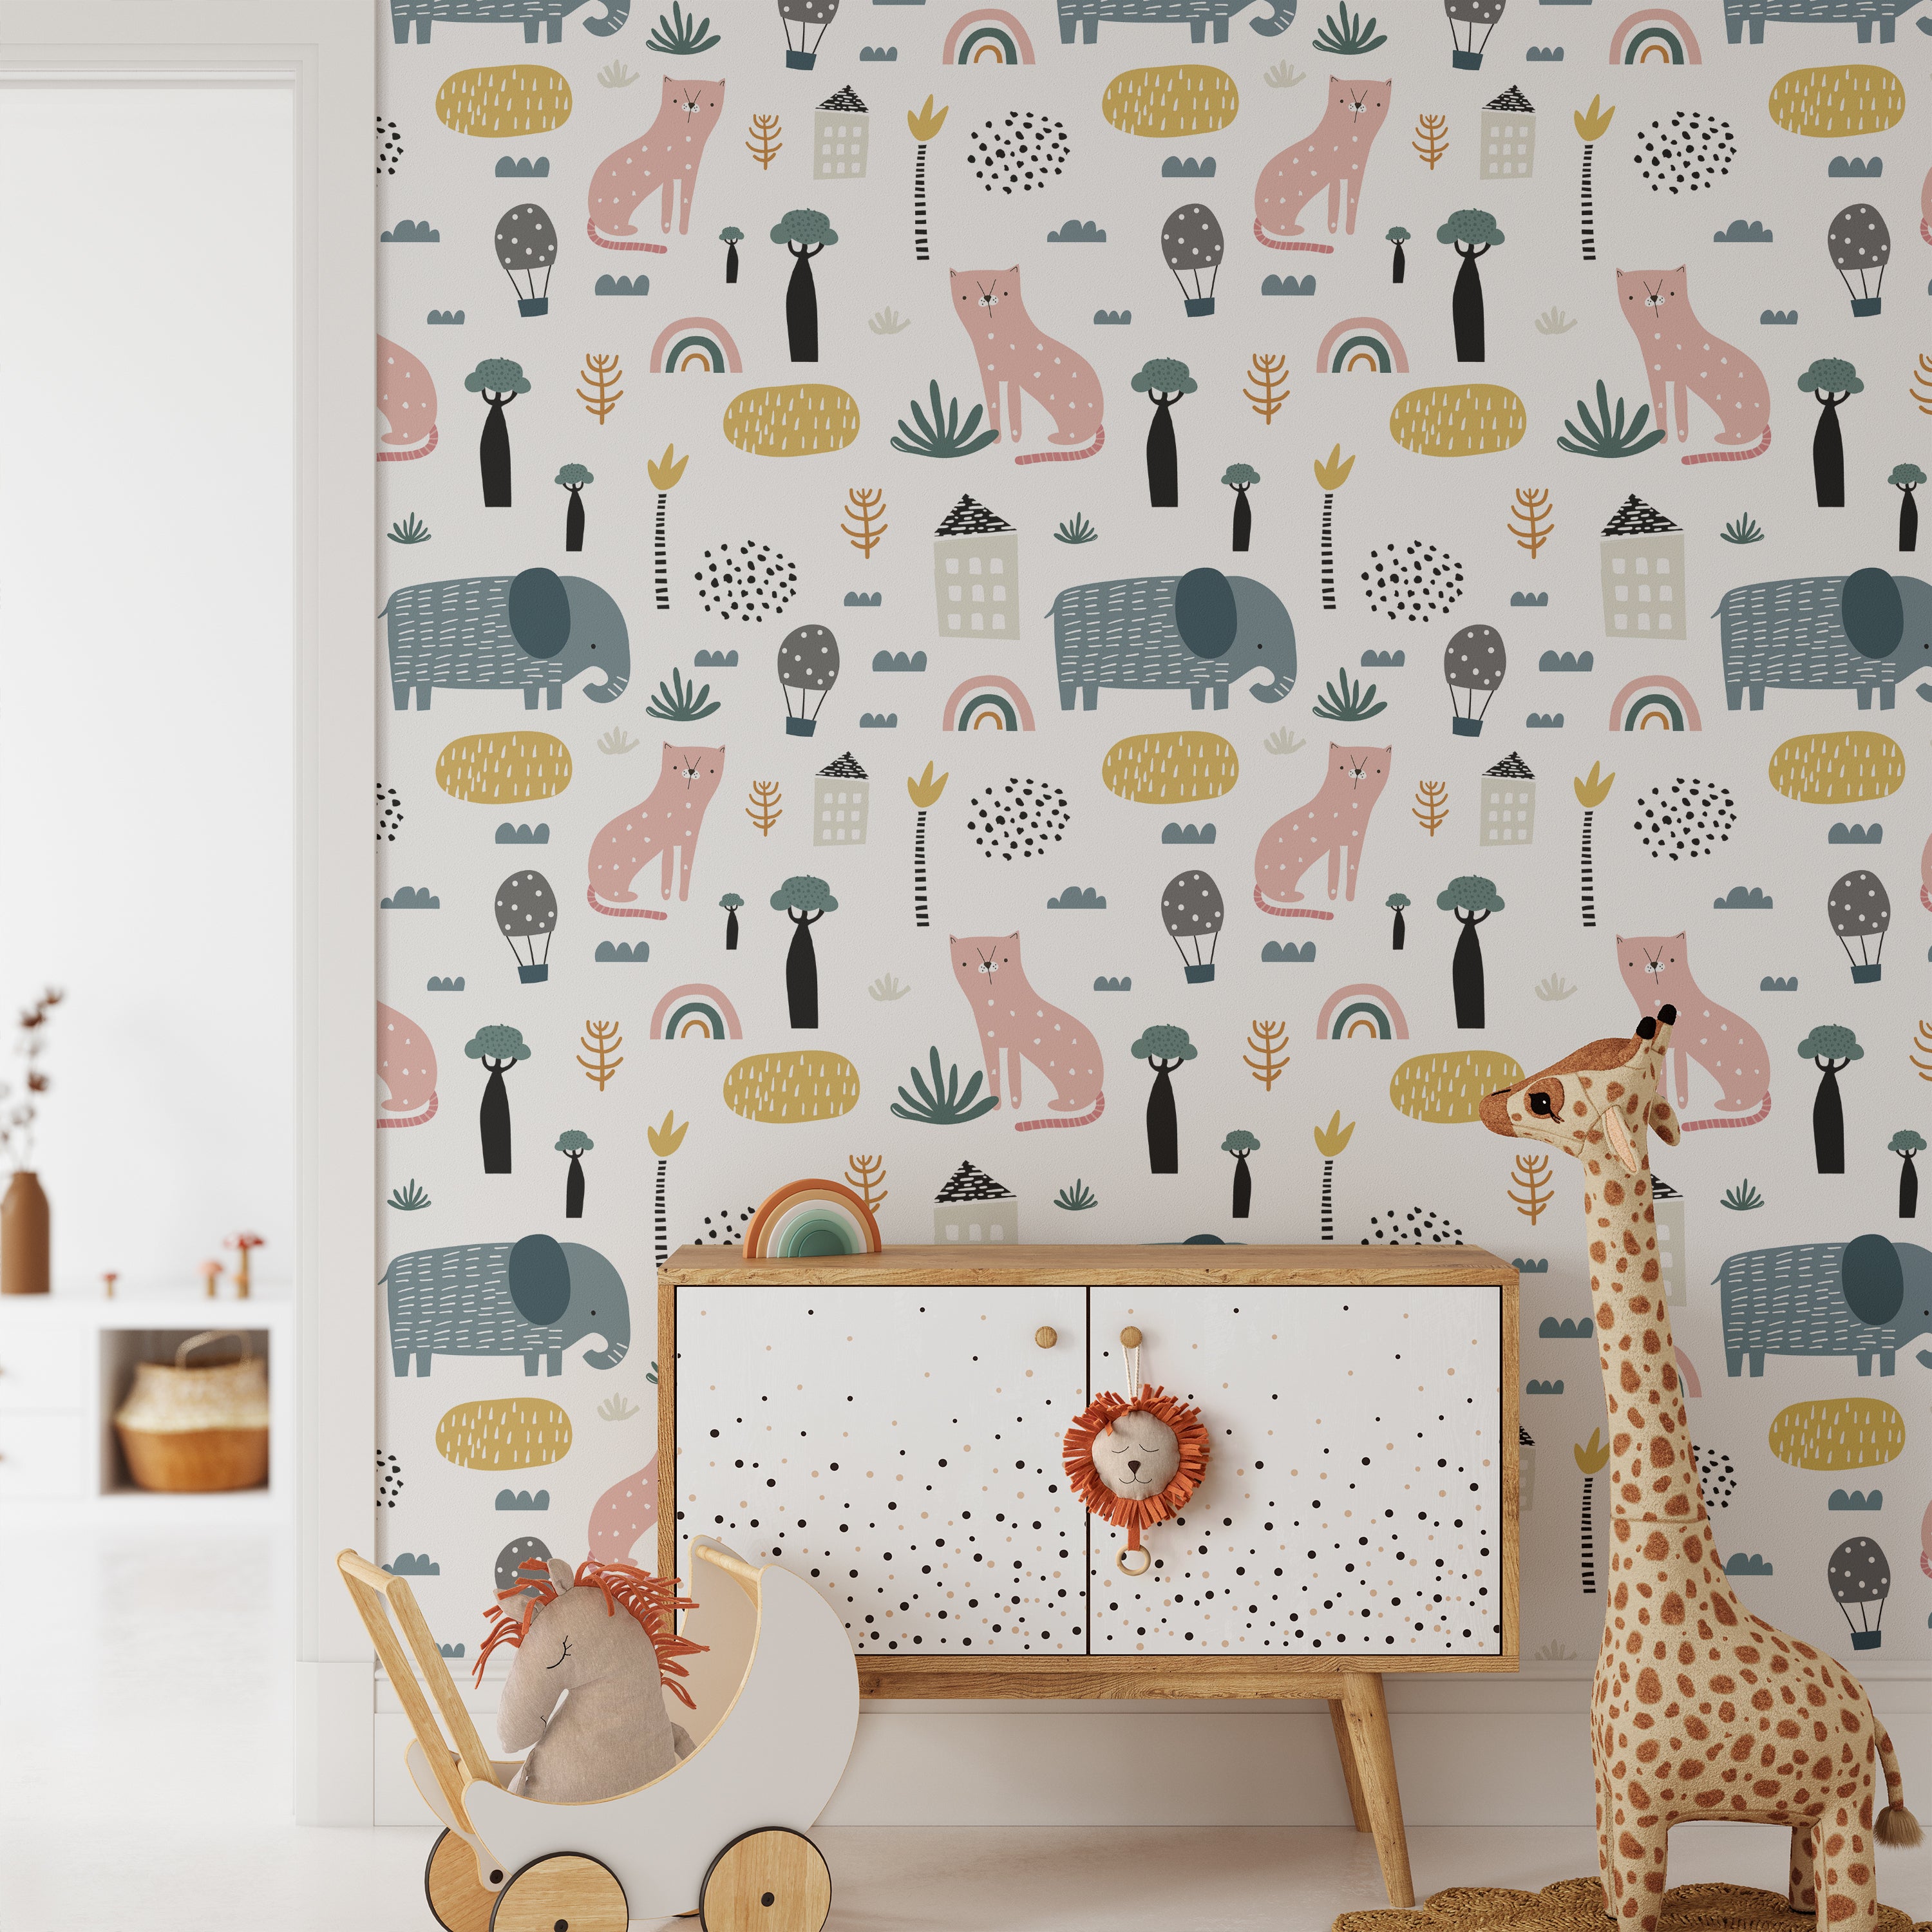 A playful children's room featuring Fox and Elephant Wallpaper, adorned with whimsical patterns of pink foxes, blue elephants, rainbows, and trees on a light background. The room includes a wooden toy horse and a cabinet decorated with a lion toy, creating a vibrant and imaginative space.